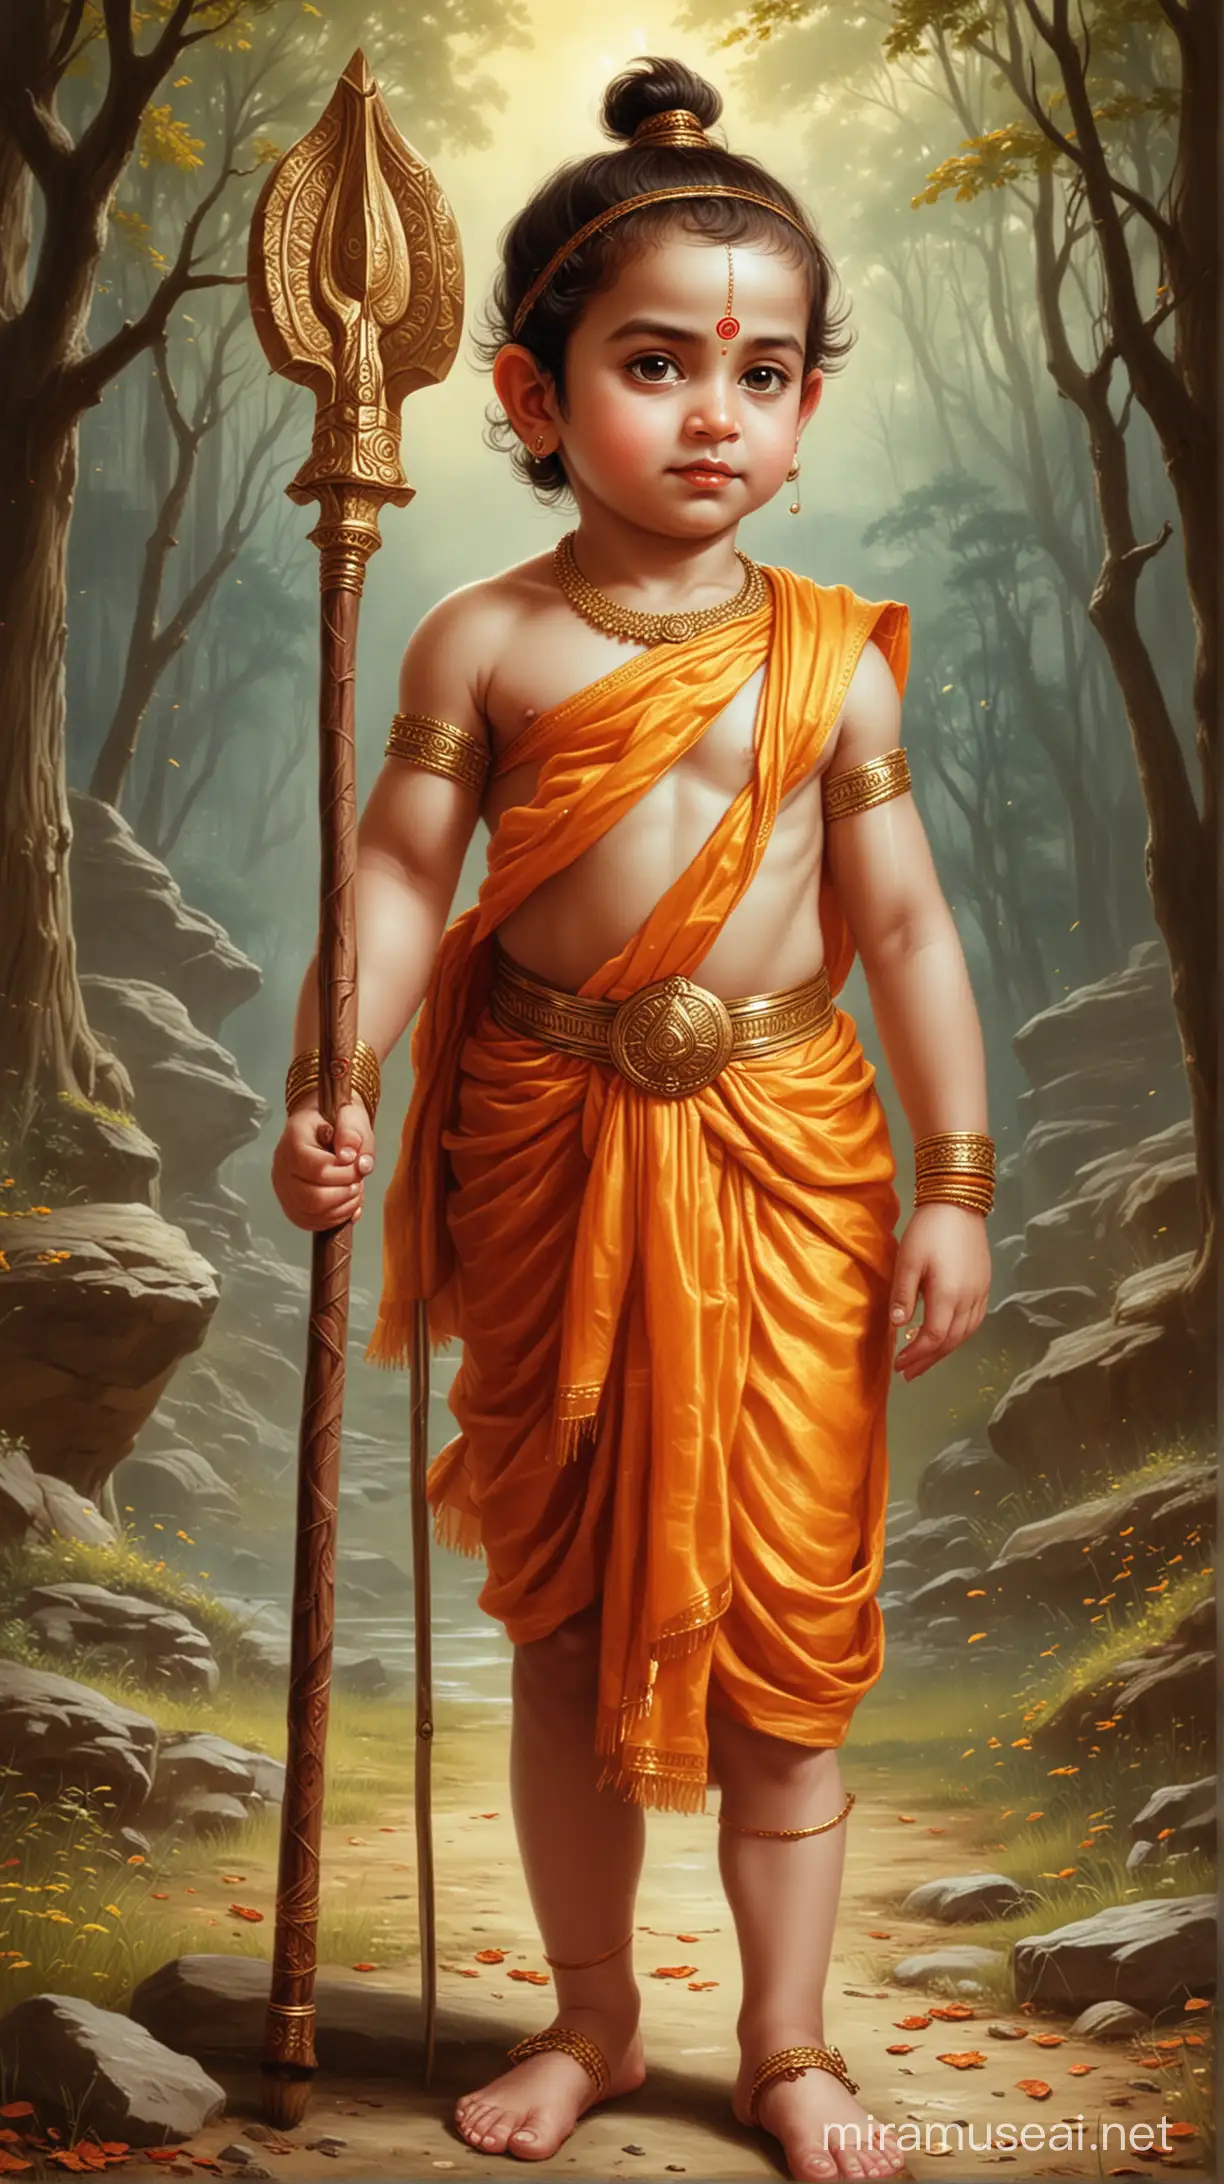 Lord Ram as small child